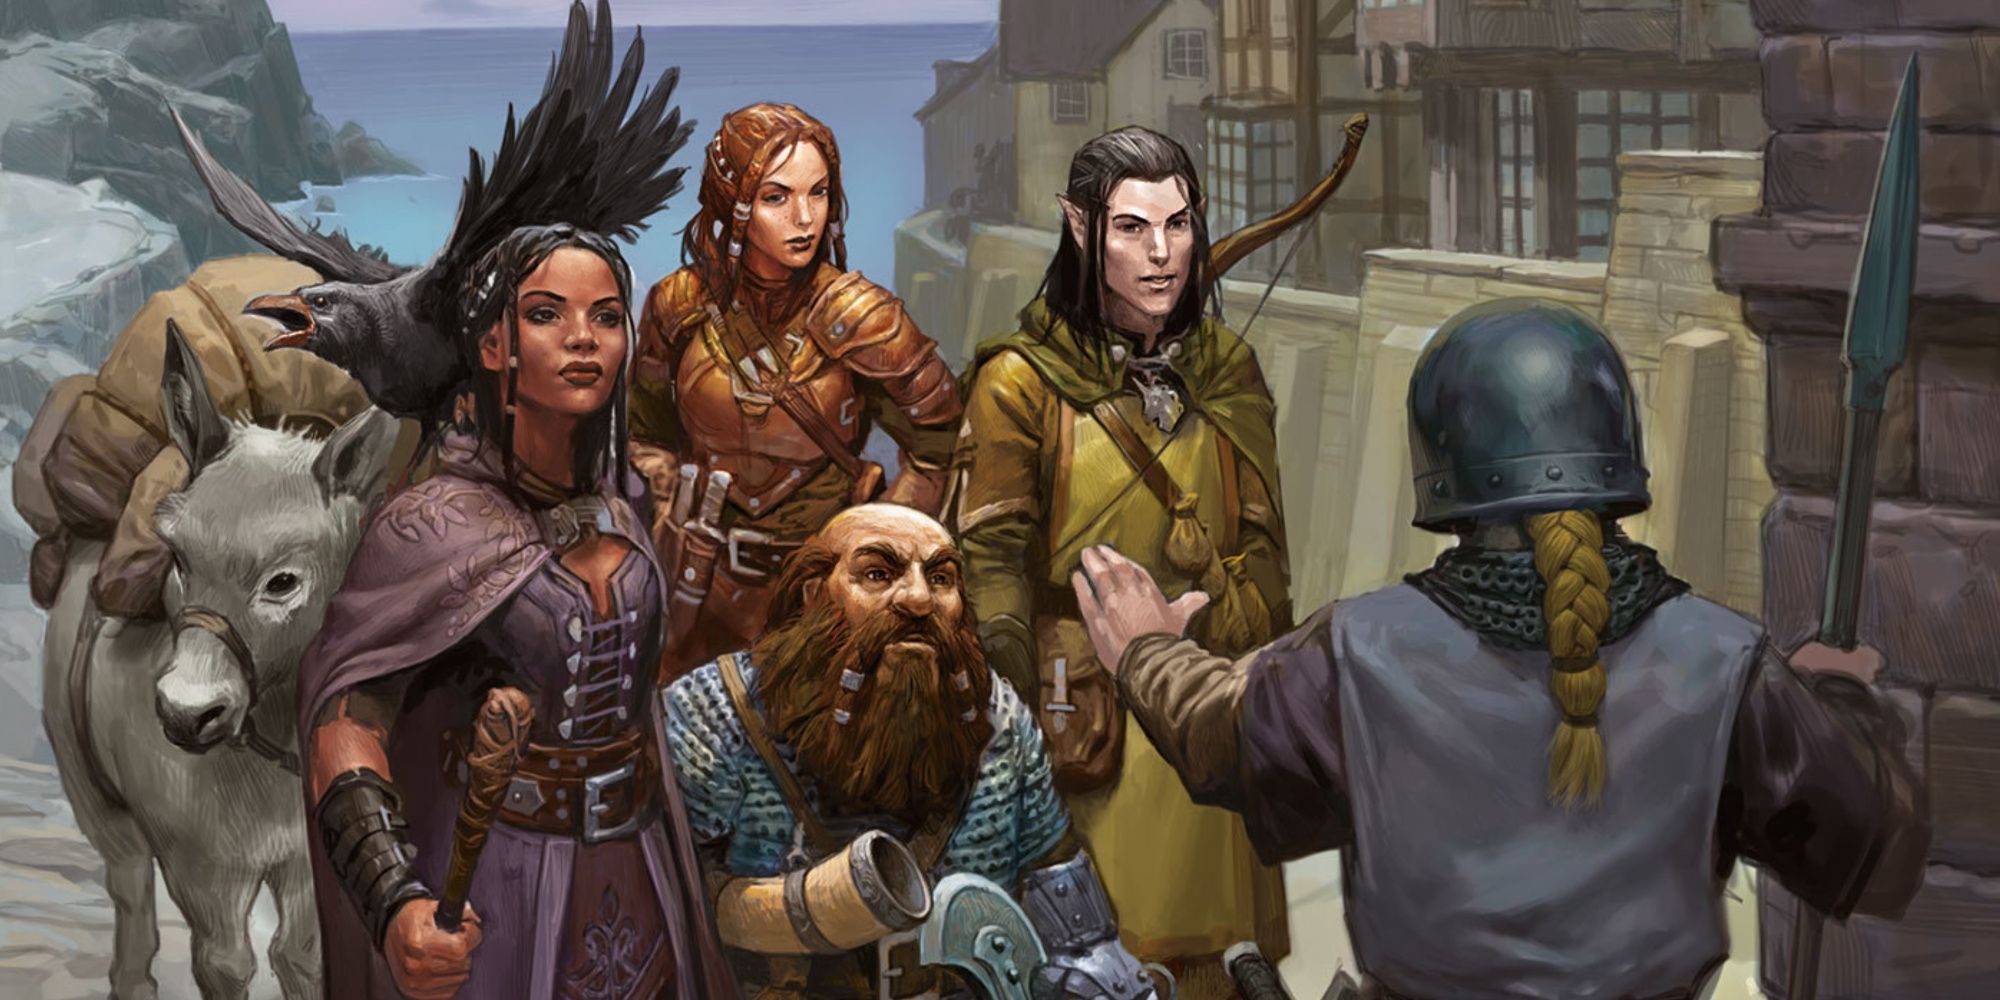 Dungeons & Dragons - Adventurers trying to enter a city get stopped by a guard at the gates